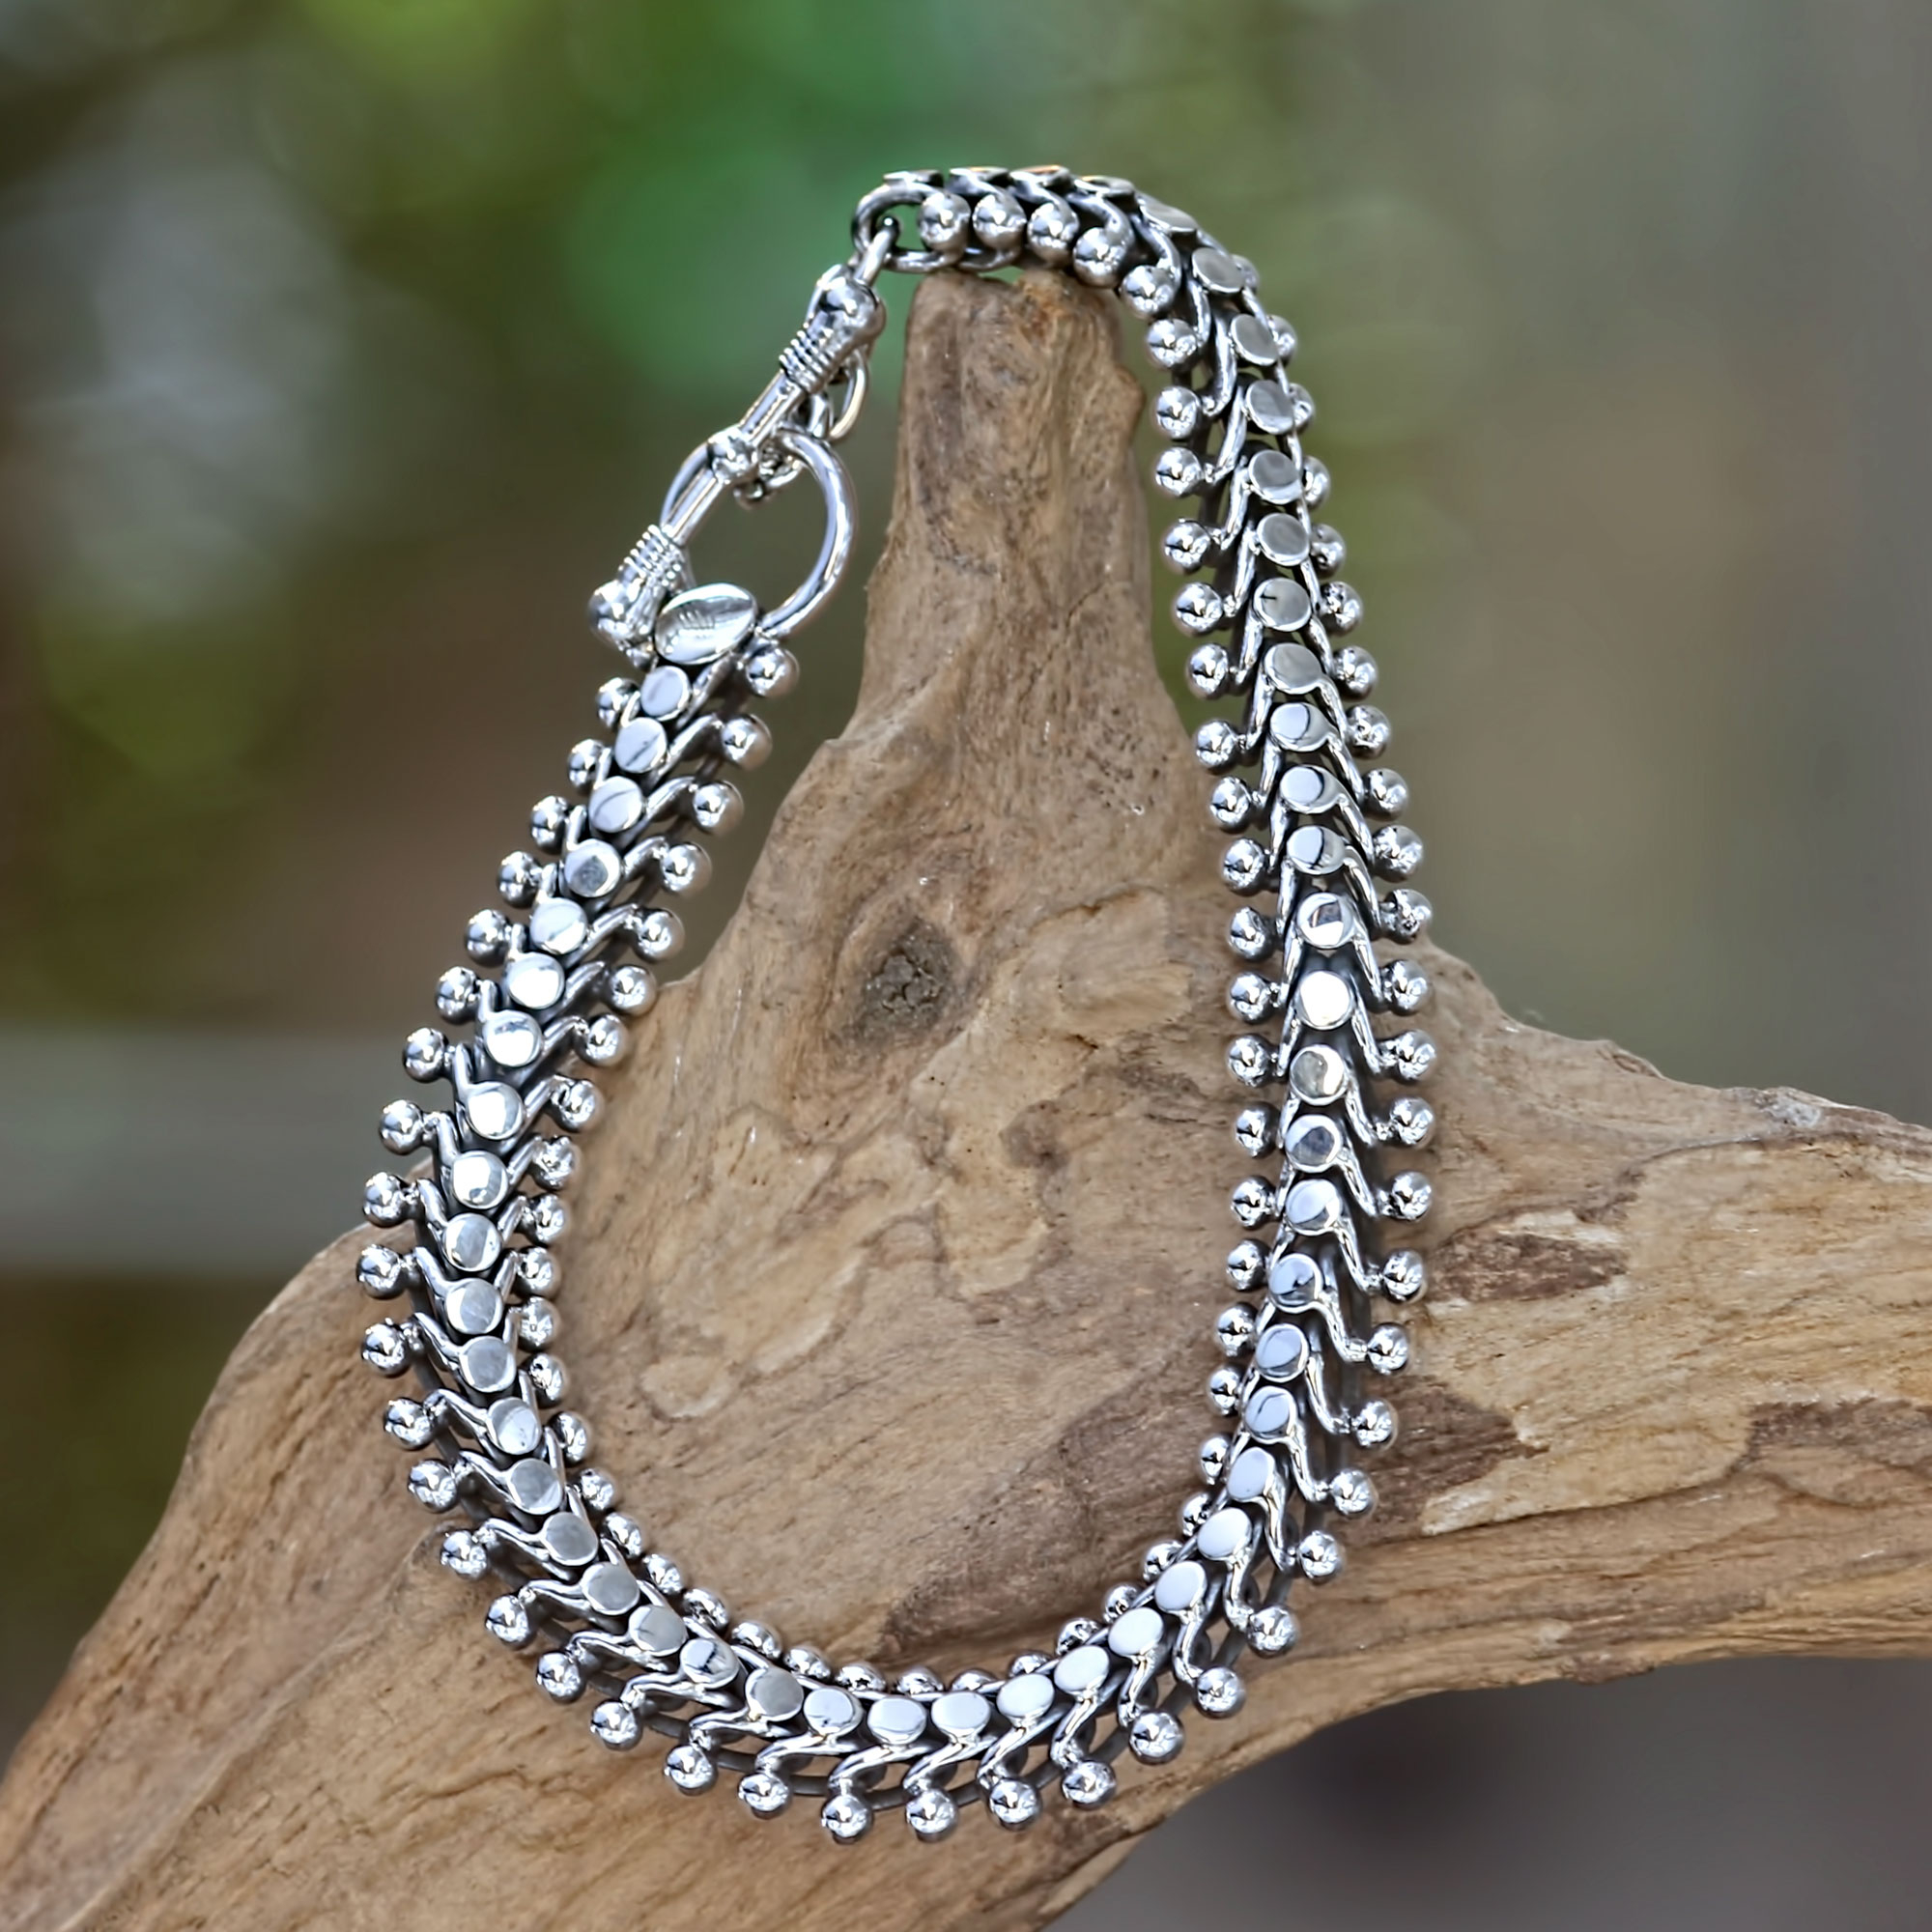 Handcrafted sterling silver jewelry